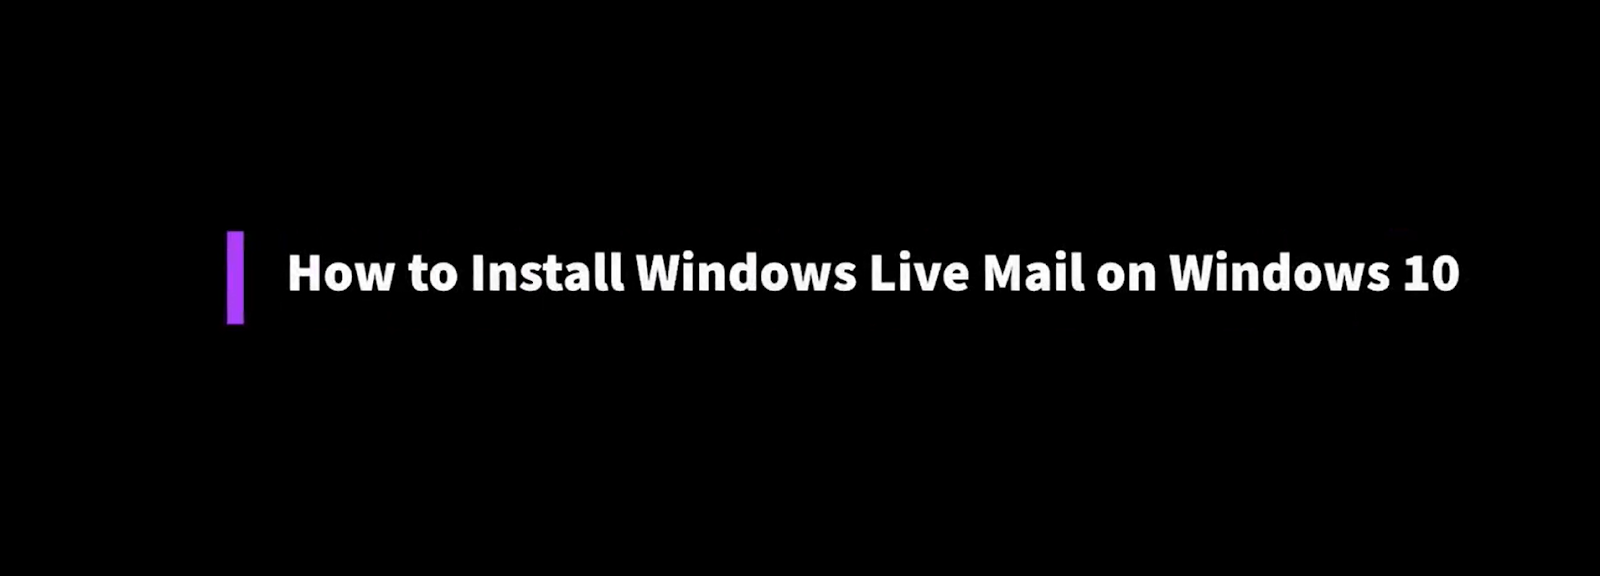 How to Uninstall Windows Live Mail on Windows 10